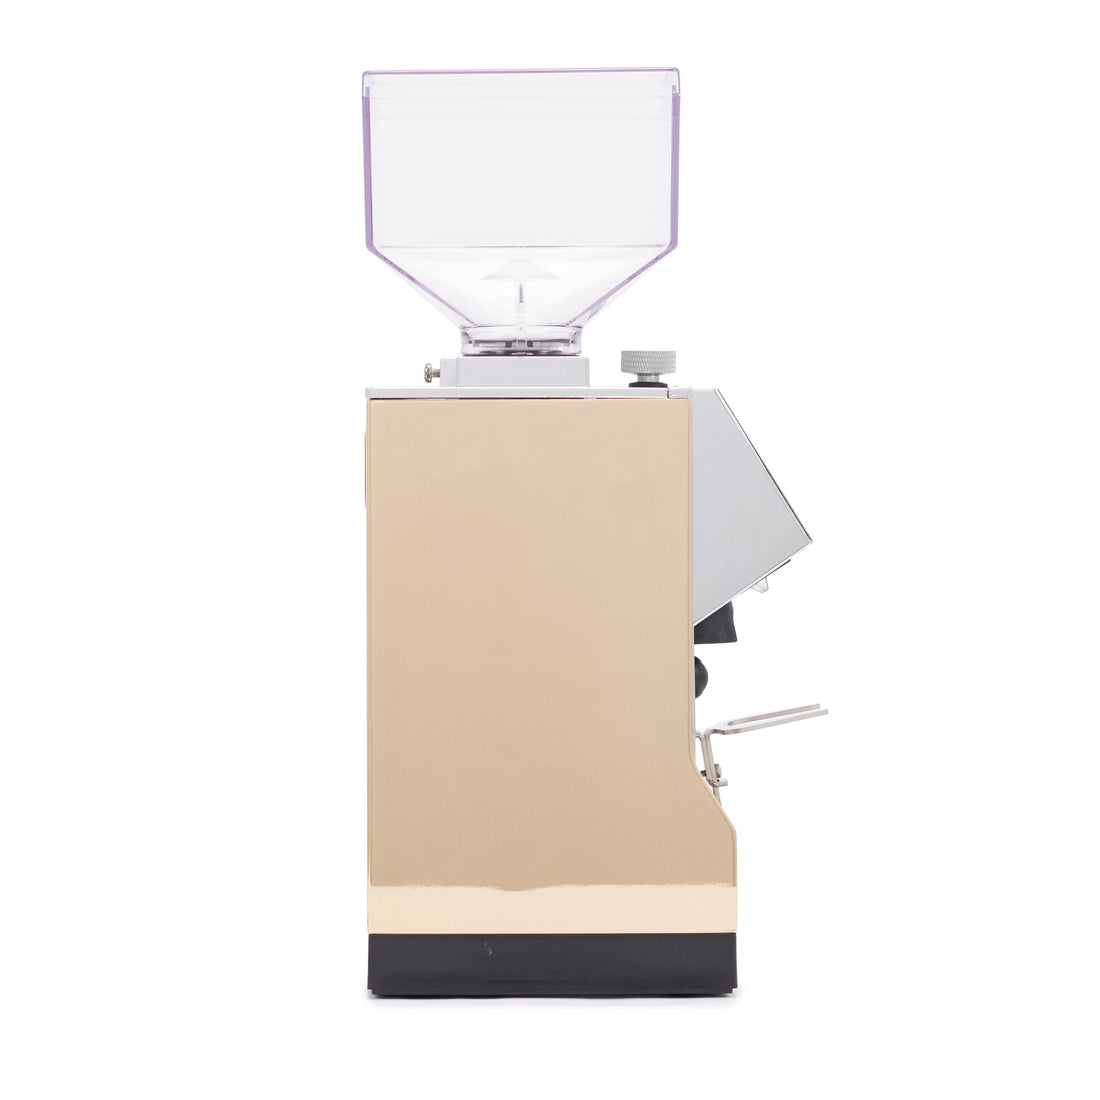 Eureka Mignon Magnifico Coffee Grinder in Rose Gold Right Facing || rose gold